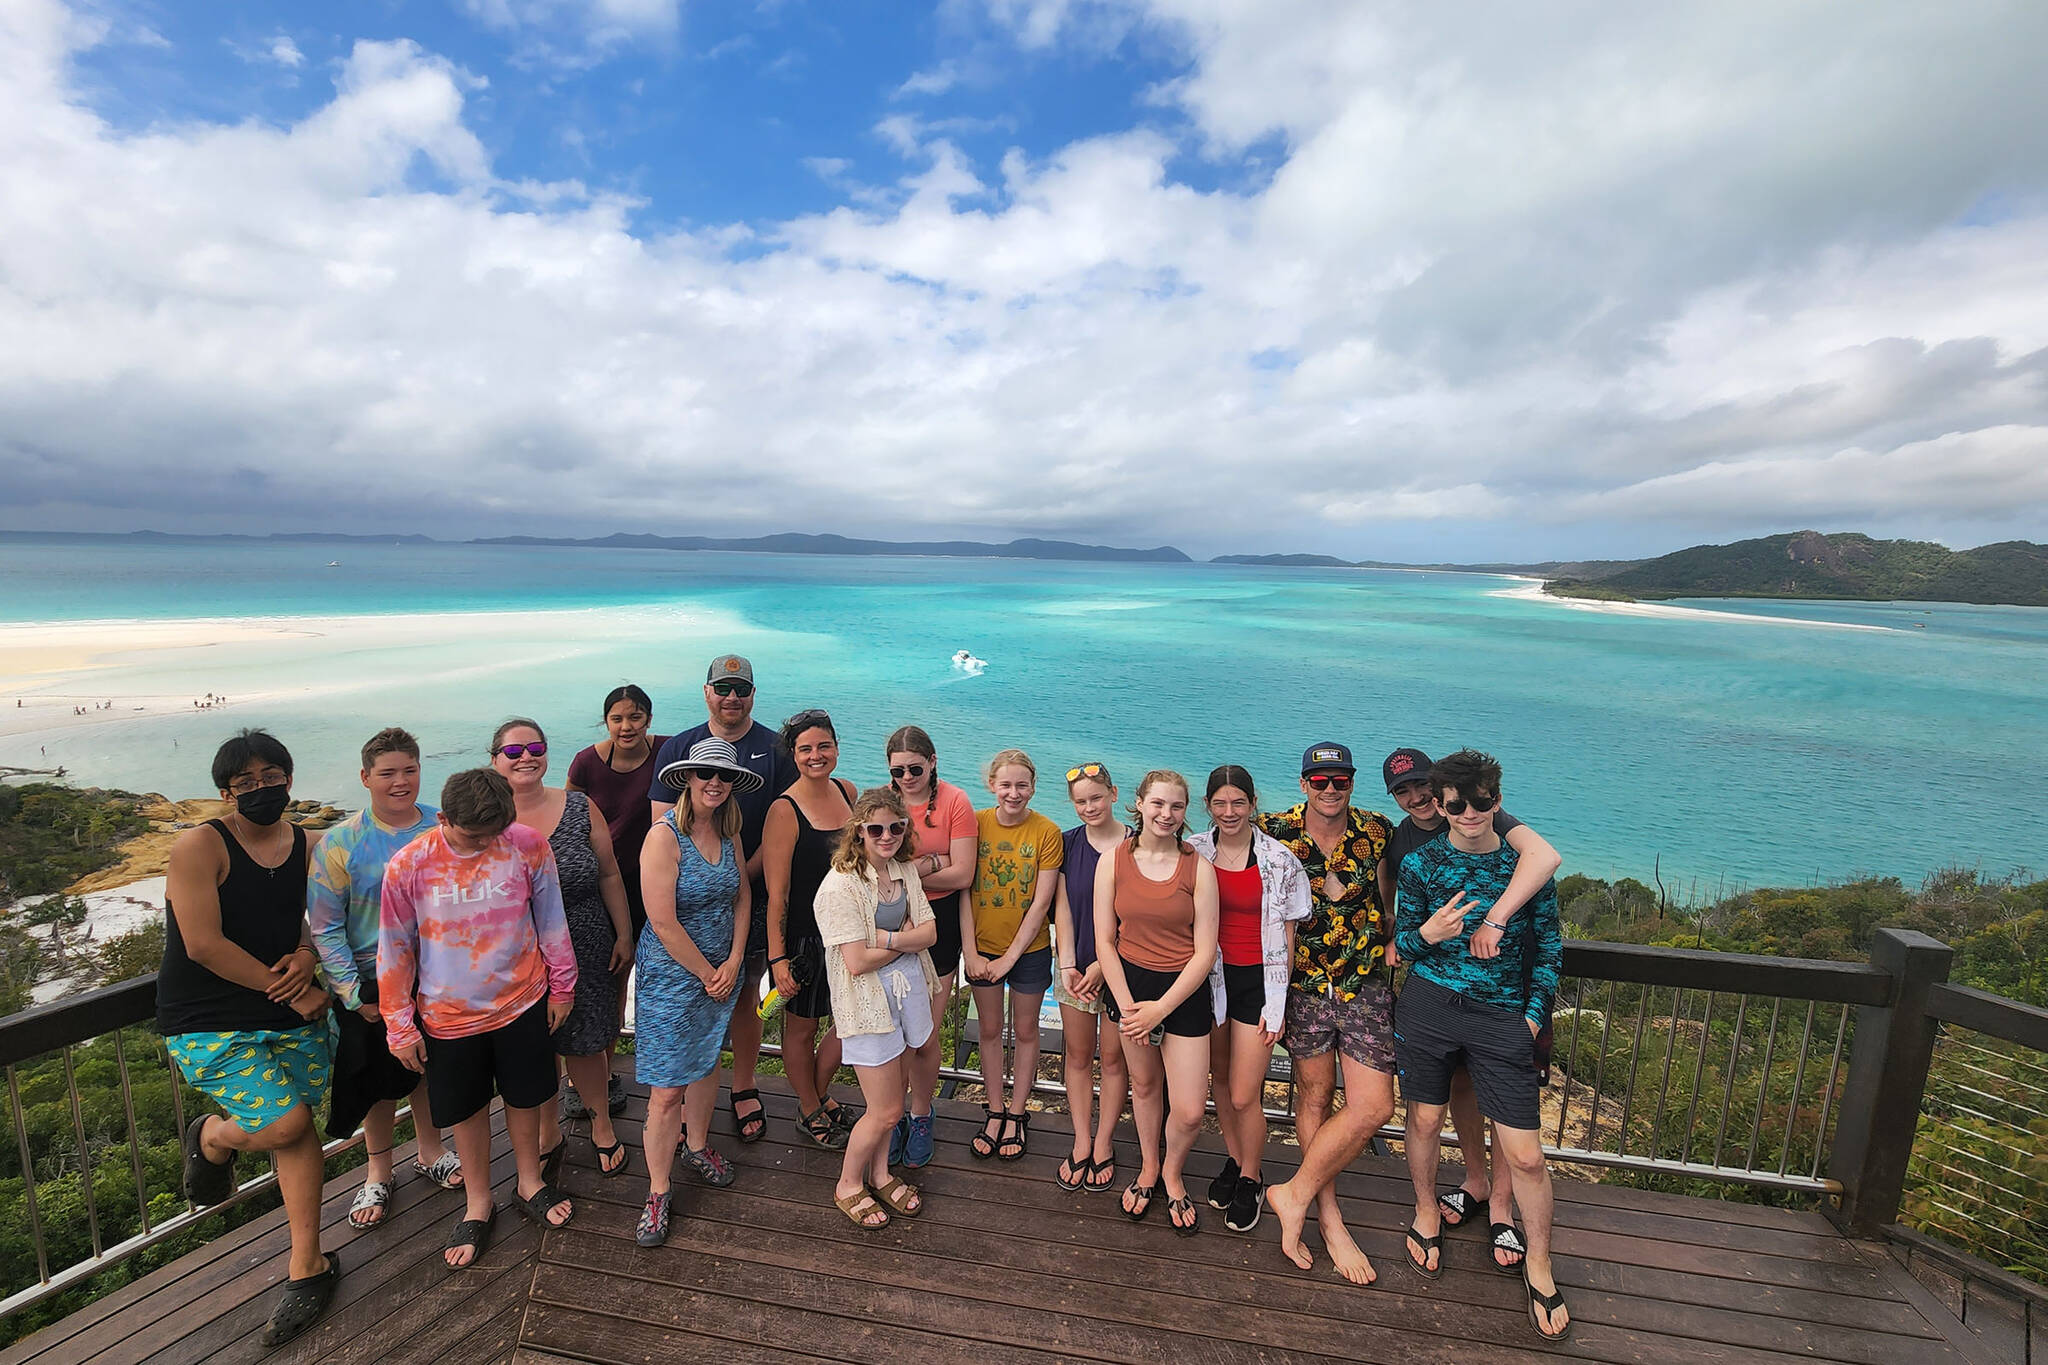 Courtesy Photo / Juneau Culture Club 
Juneau Culture Club poses on the Whitehaven Beach along the Whitsundays Island in Australia on June 15.